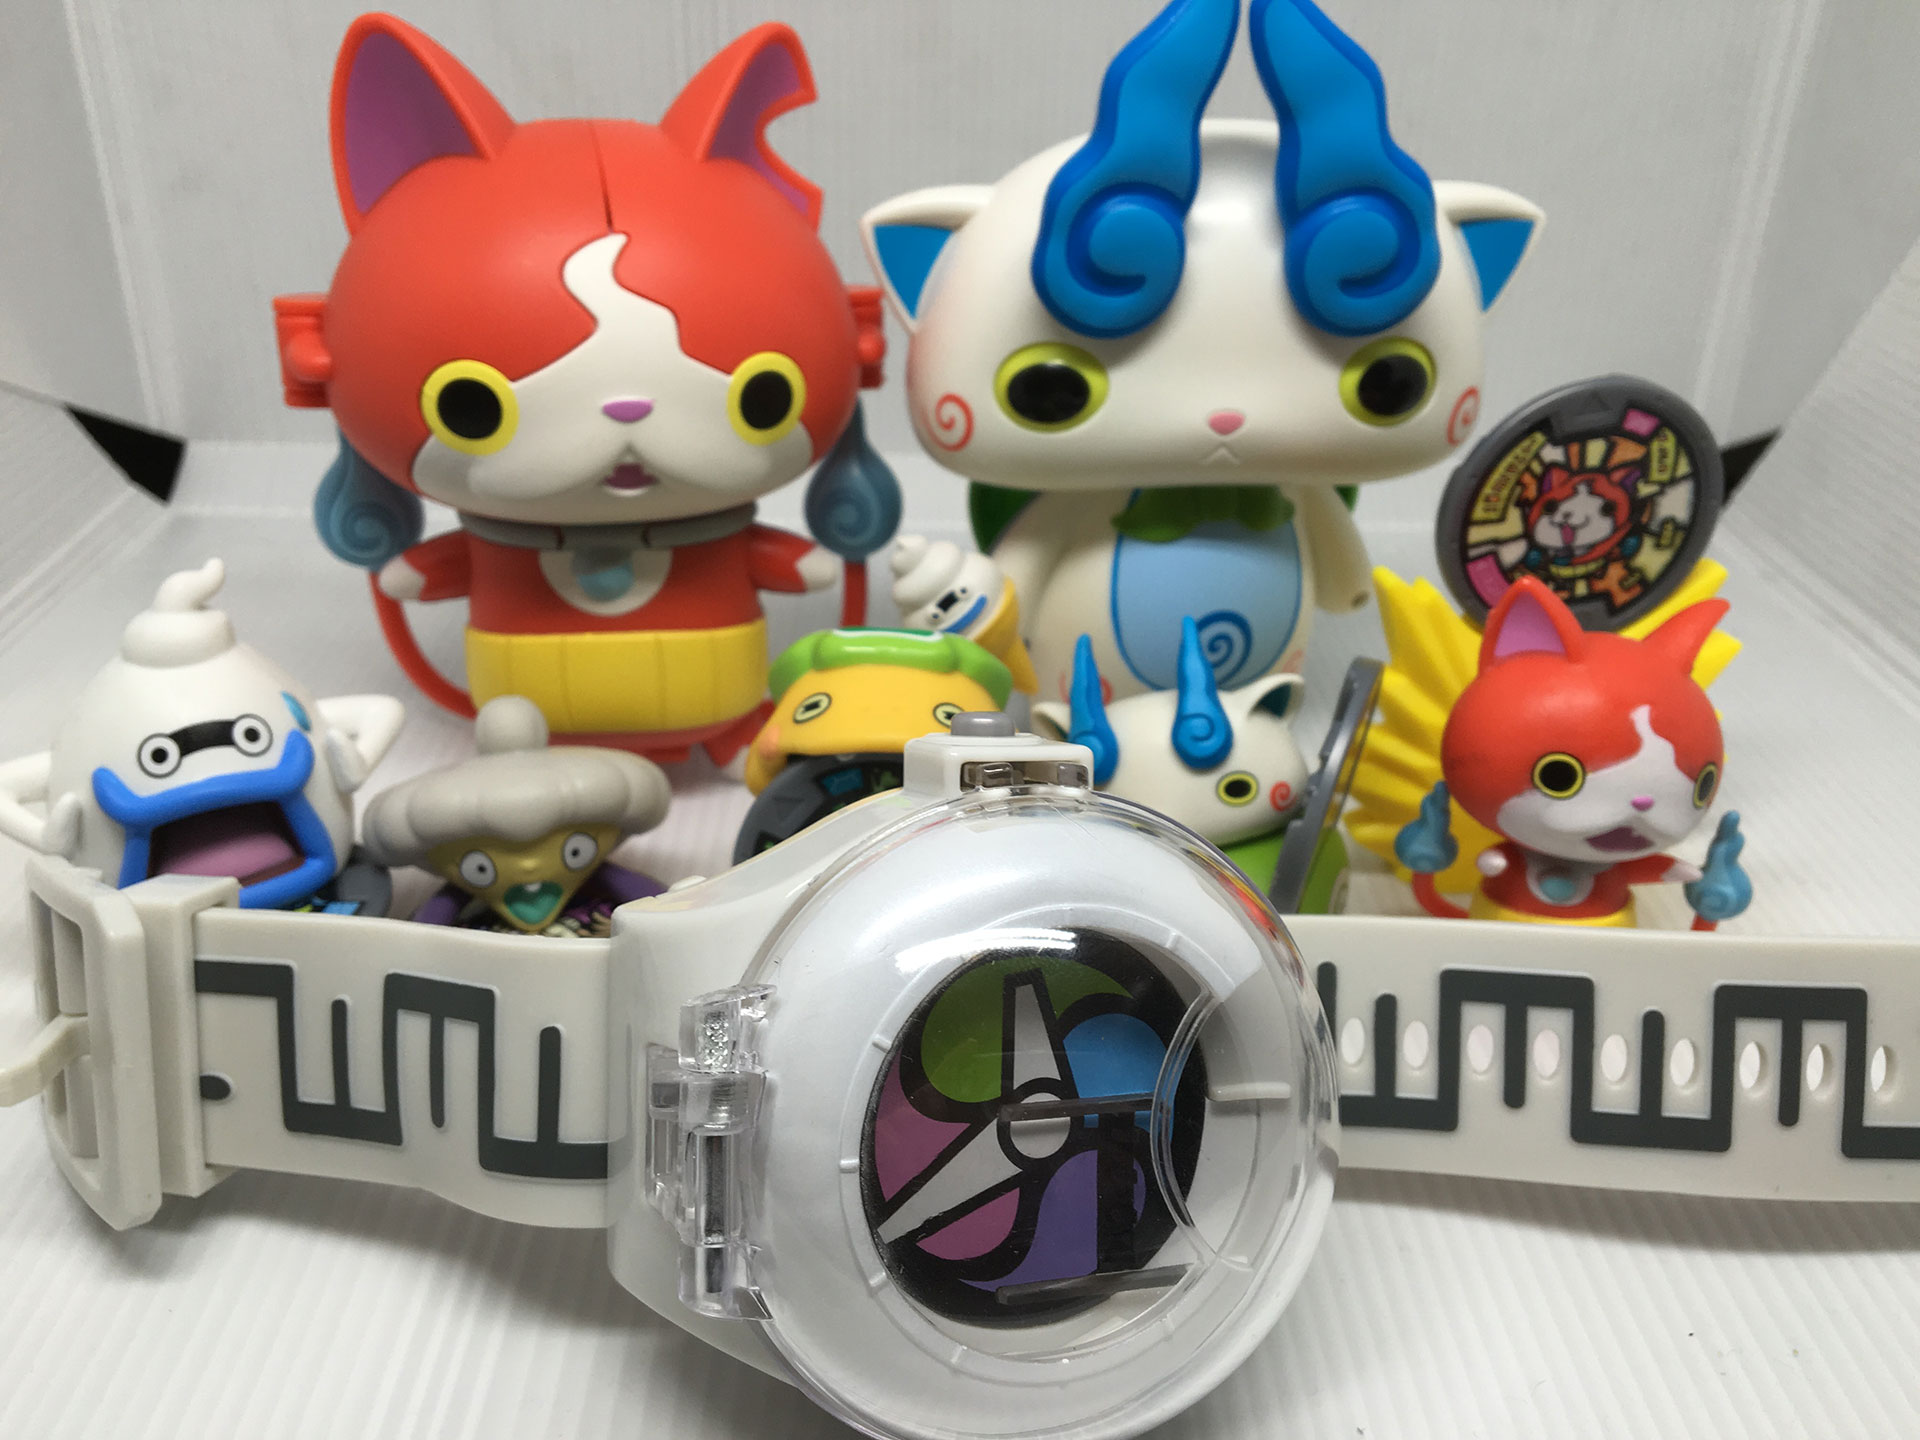 Forget The Apple Watch, The Yo-Kai Watch Toys Are Here